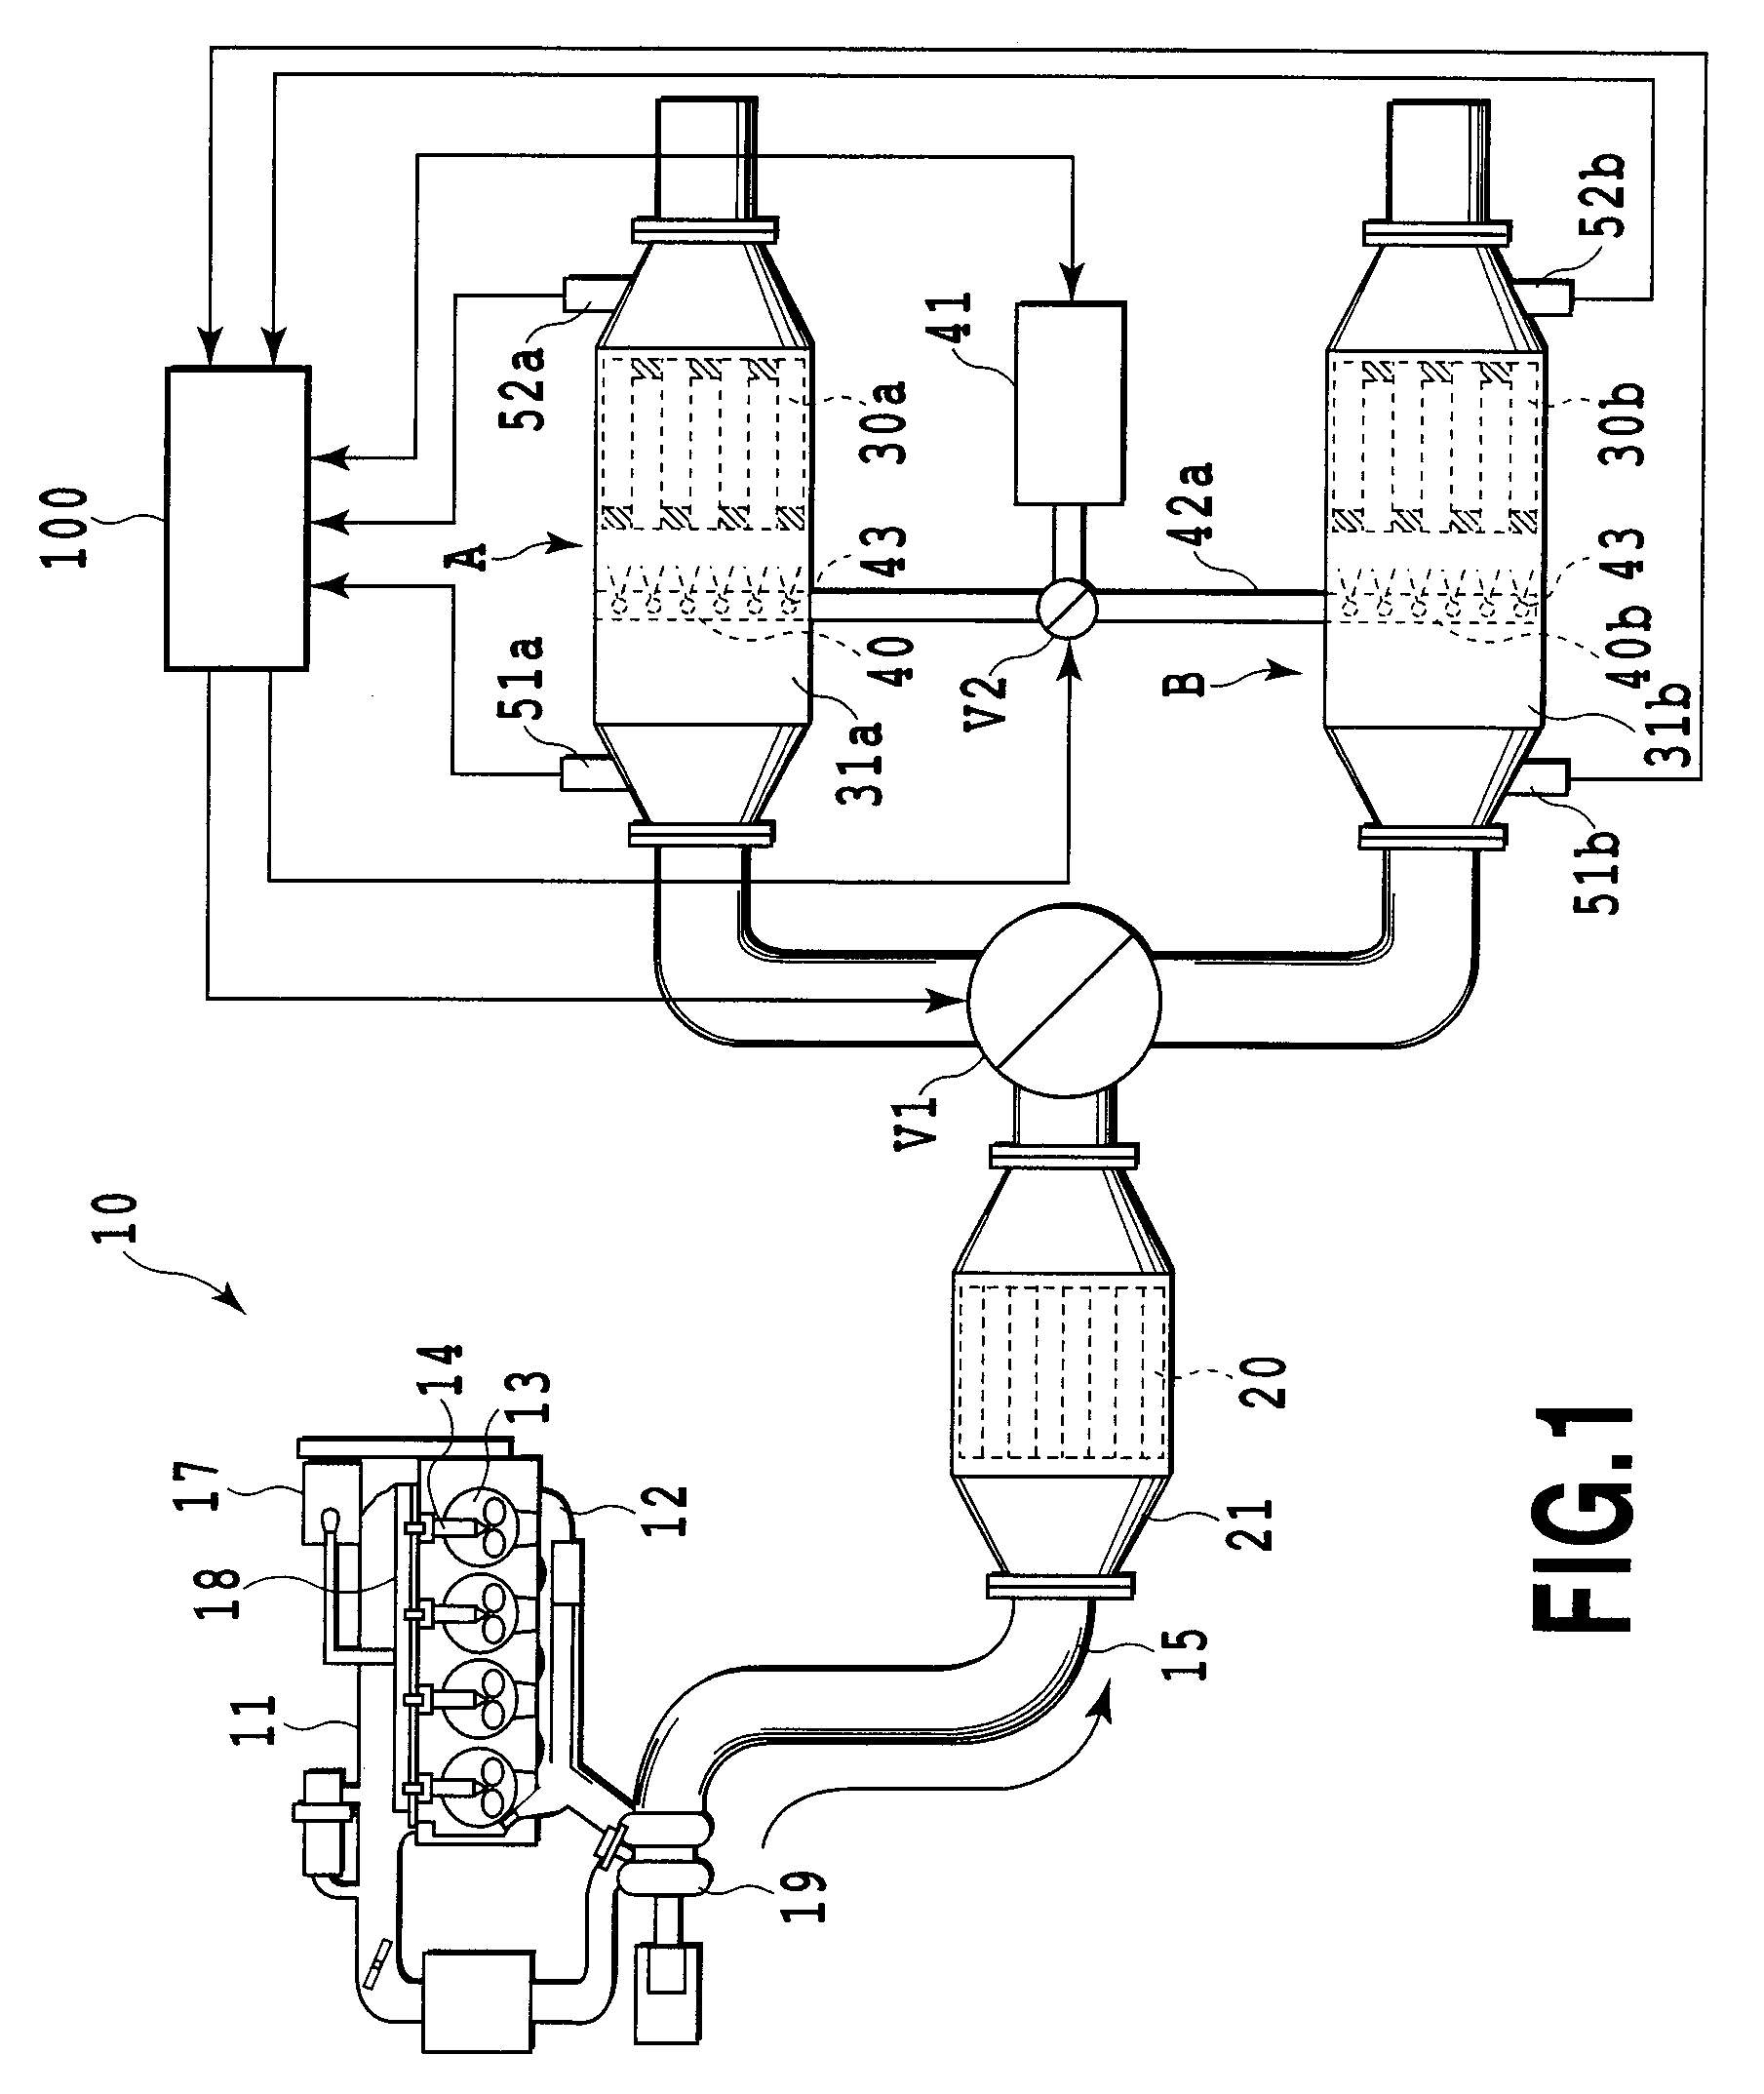 Exhaust cleaner for internal combustion engine